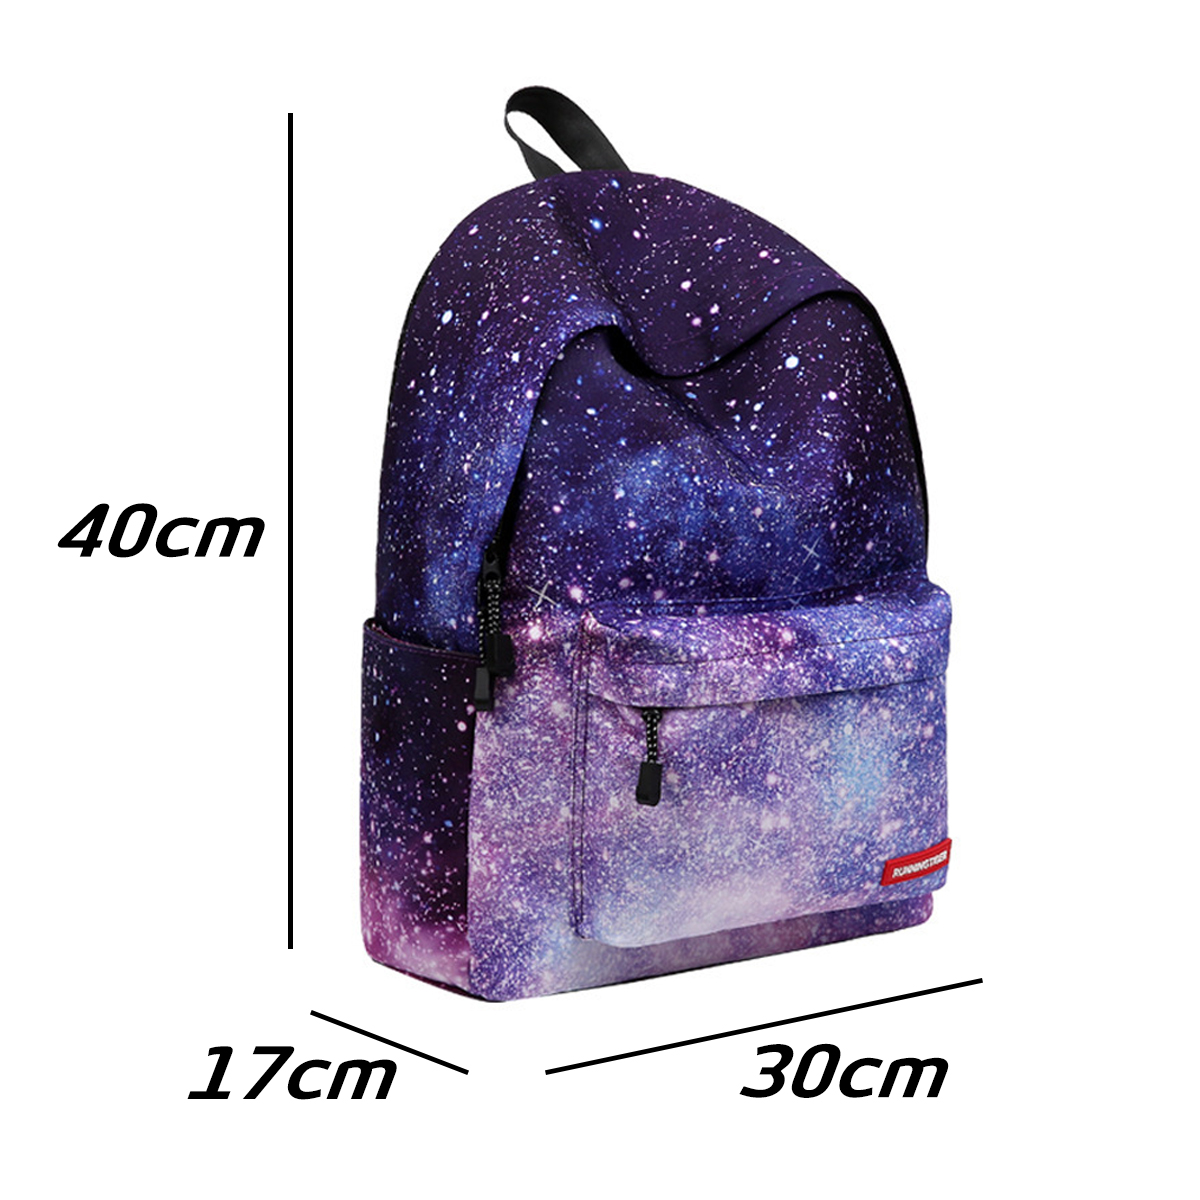 2PcsSet-Fashion-Starry-Sky-Striped-Canvas-School-Backpack-SchoolbagMatching-Pencil-Bag-Gift-for-Girl-1572762-2